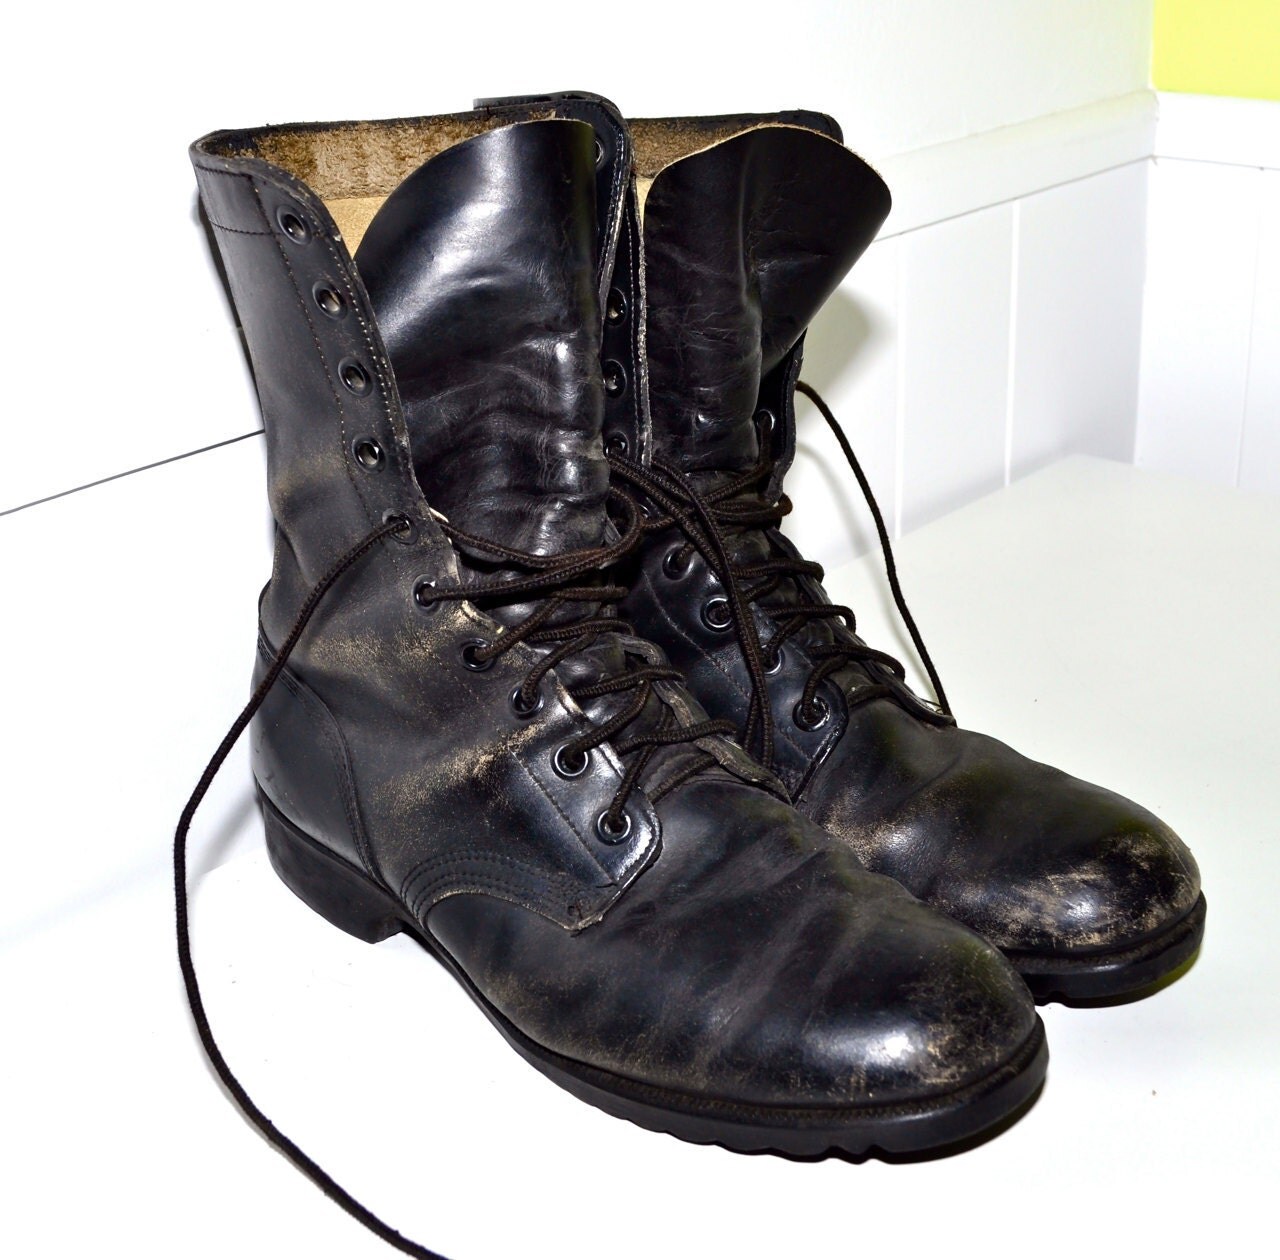 Distressed Leather Faded Black MILITARY Regalia COMBAT BOOTS